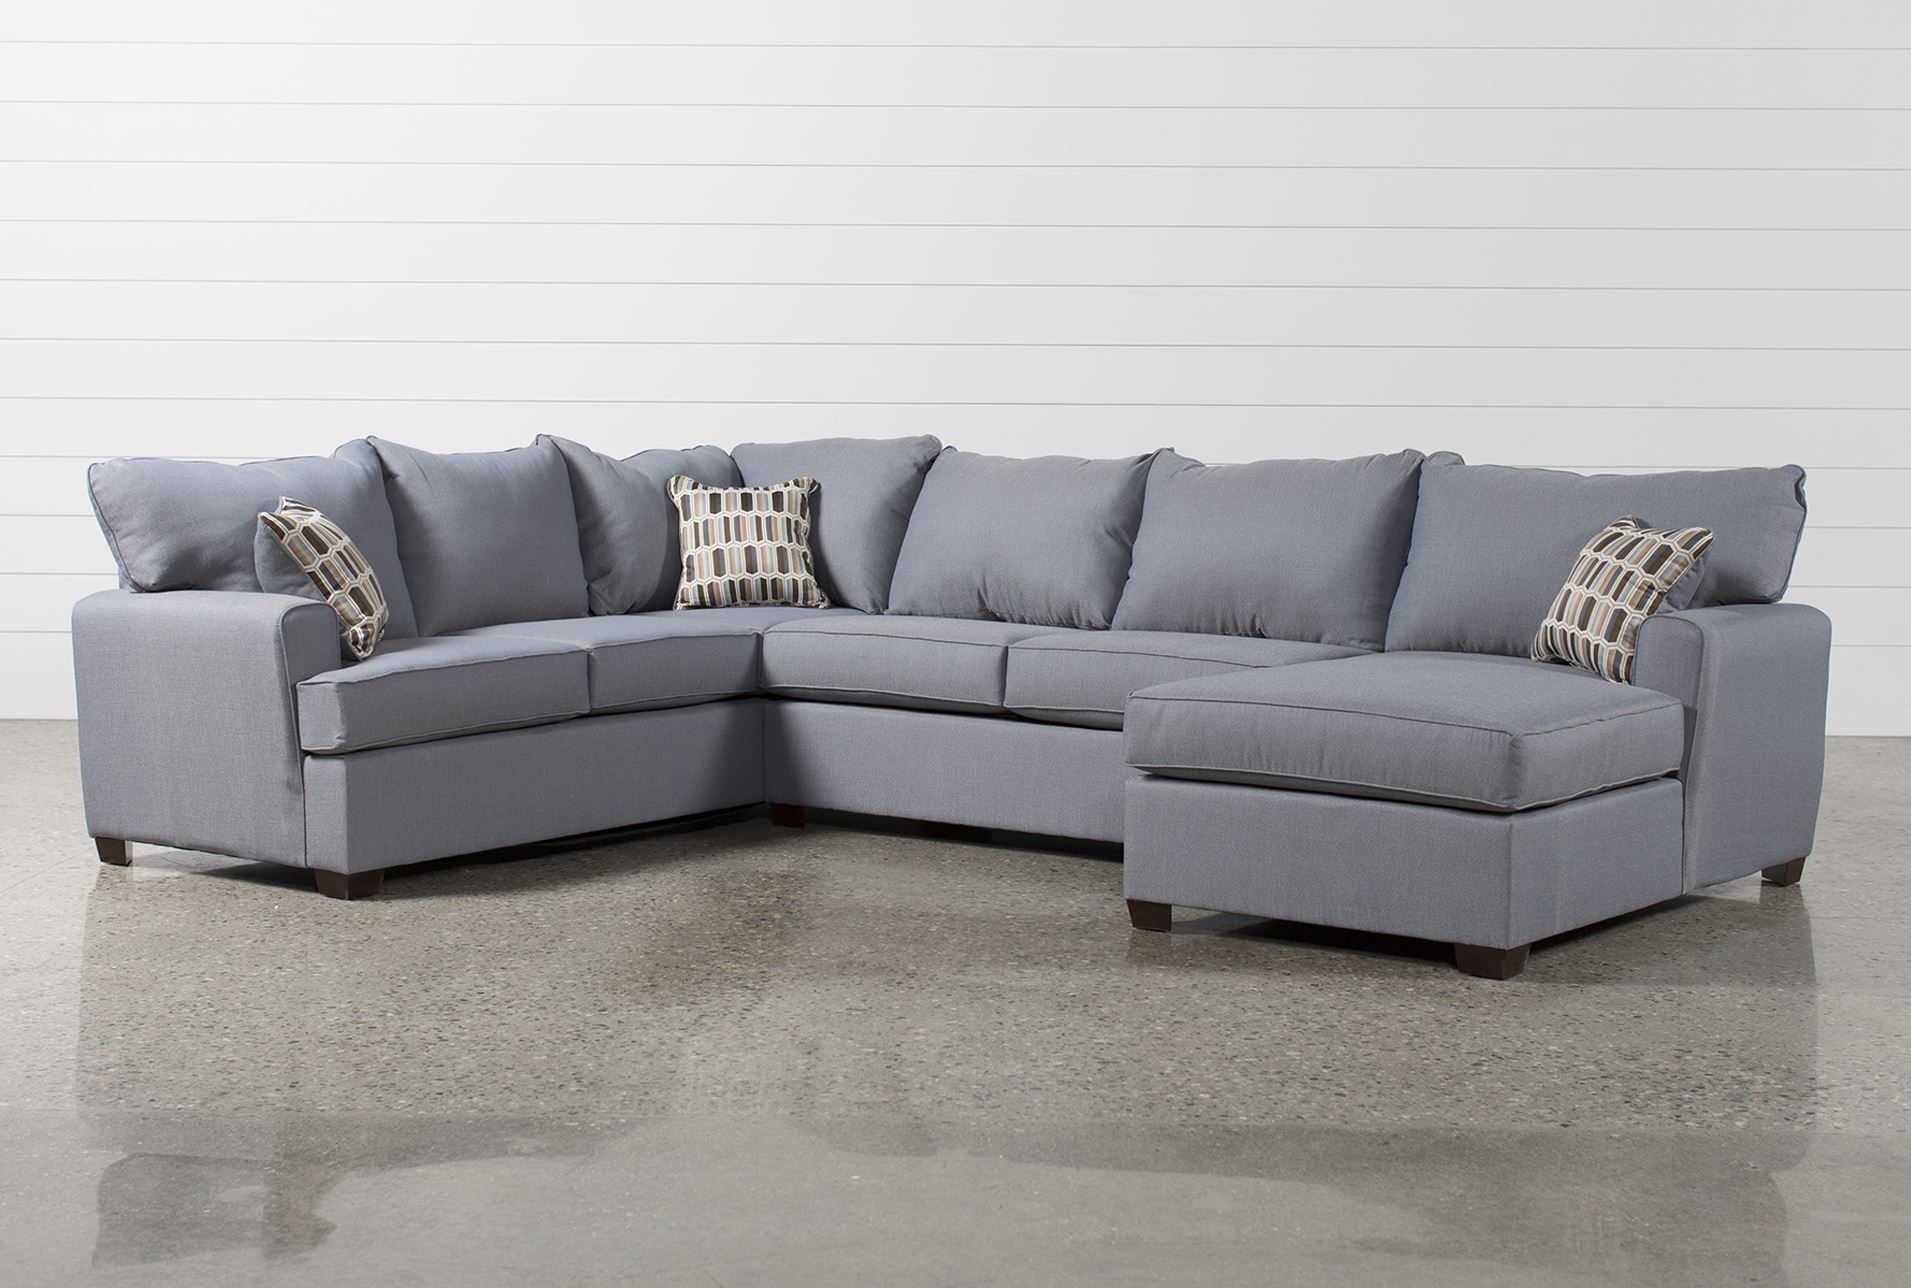 Bingham 3 Piece Sectional W/raf Chaise – Signature | For The Home Pertaining To Meyer 3 Piece Sectionals With Raf Chaise (View 4 of 30)